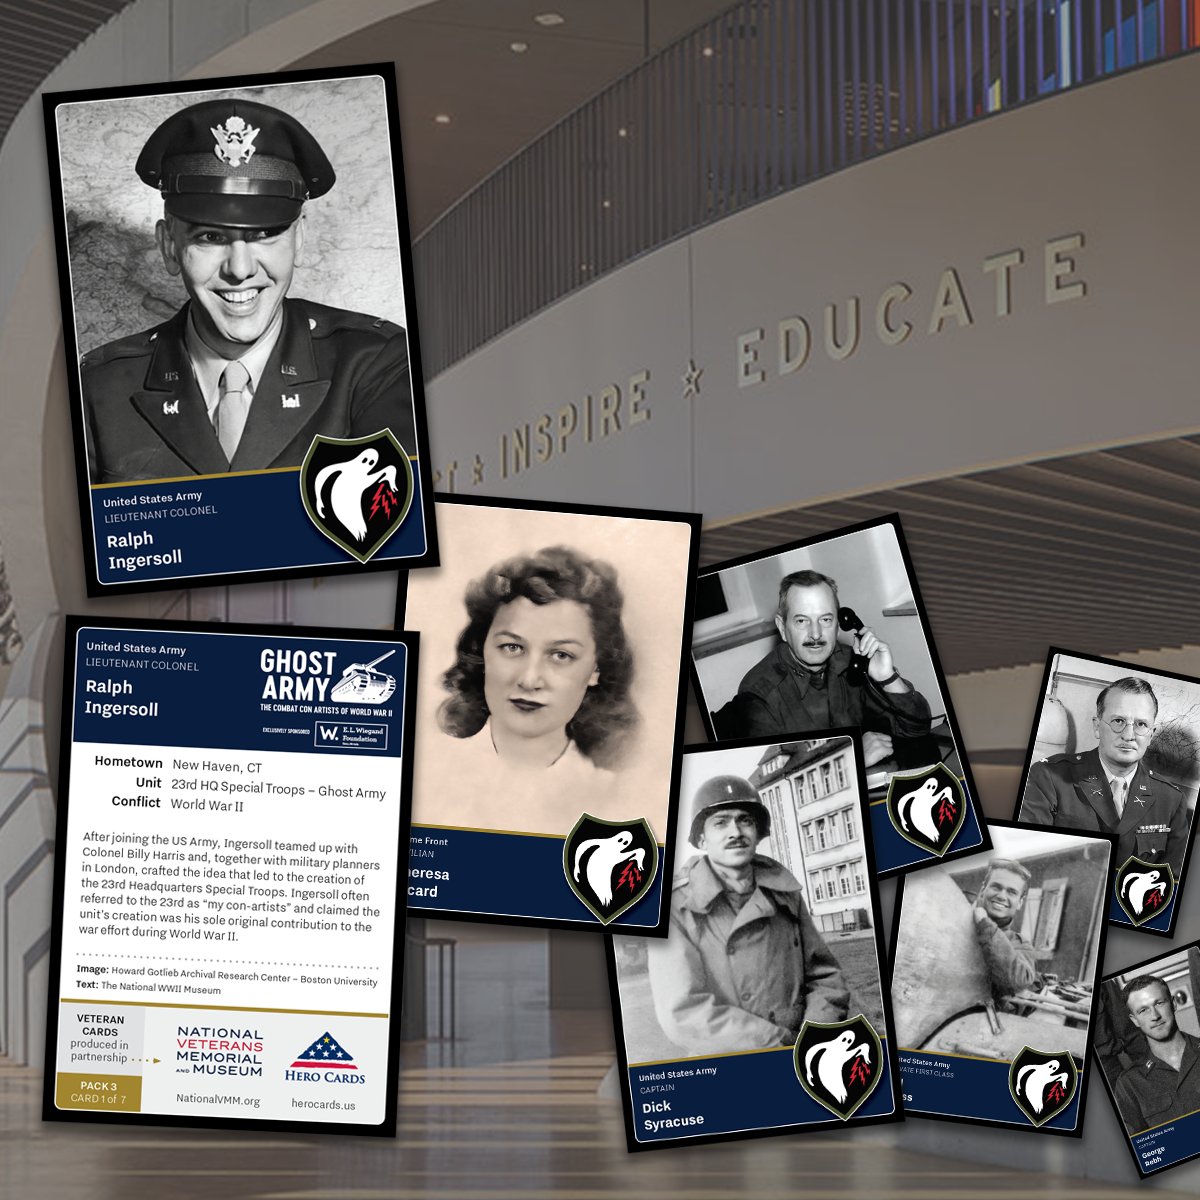 Plan your trip! The @NationalVMM (Columbus, OH) and @WWIImuseum have partnered on a new exhibition. “Ghost Army” runs May 25-Aug 25. We’ve produced a special set of Ghost Army Hero Cards, available only at the exhibit! bit.ly/3QysMId @BradleyFdn @historyed @NCSSNetwork